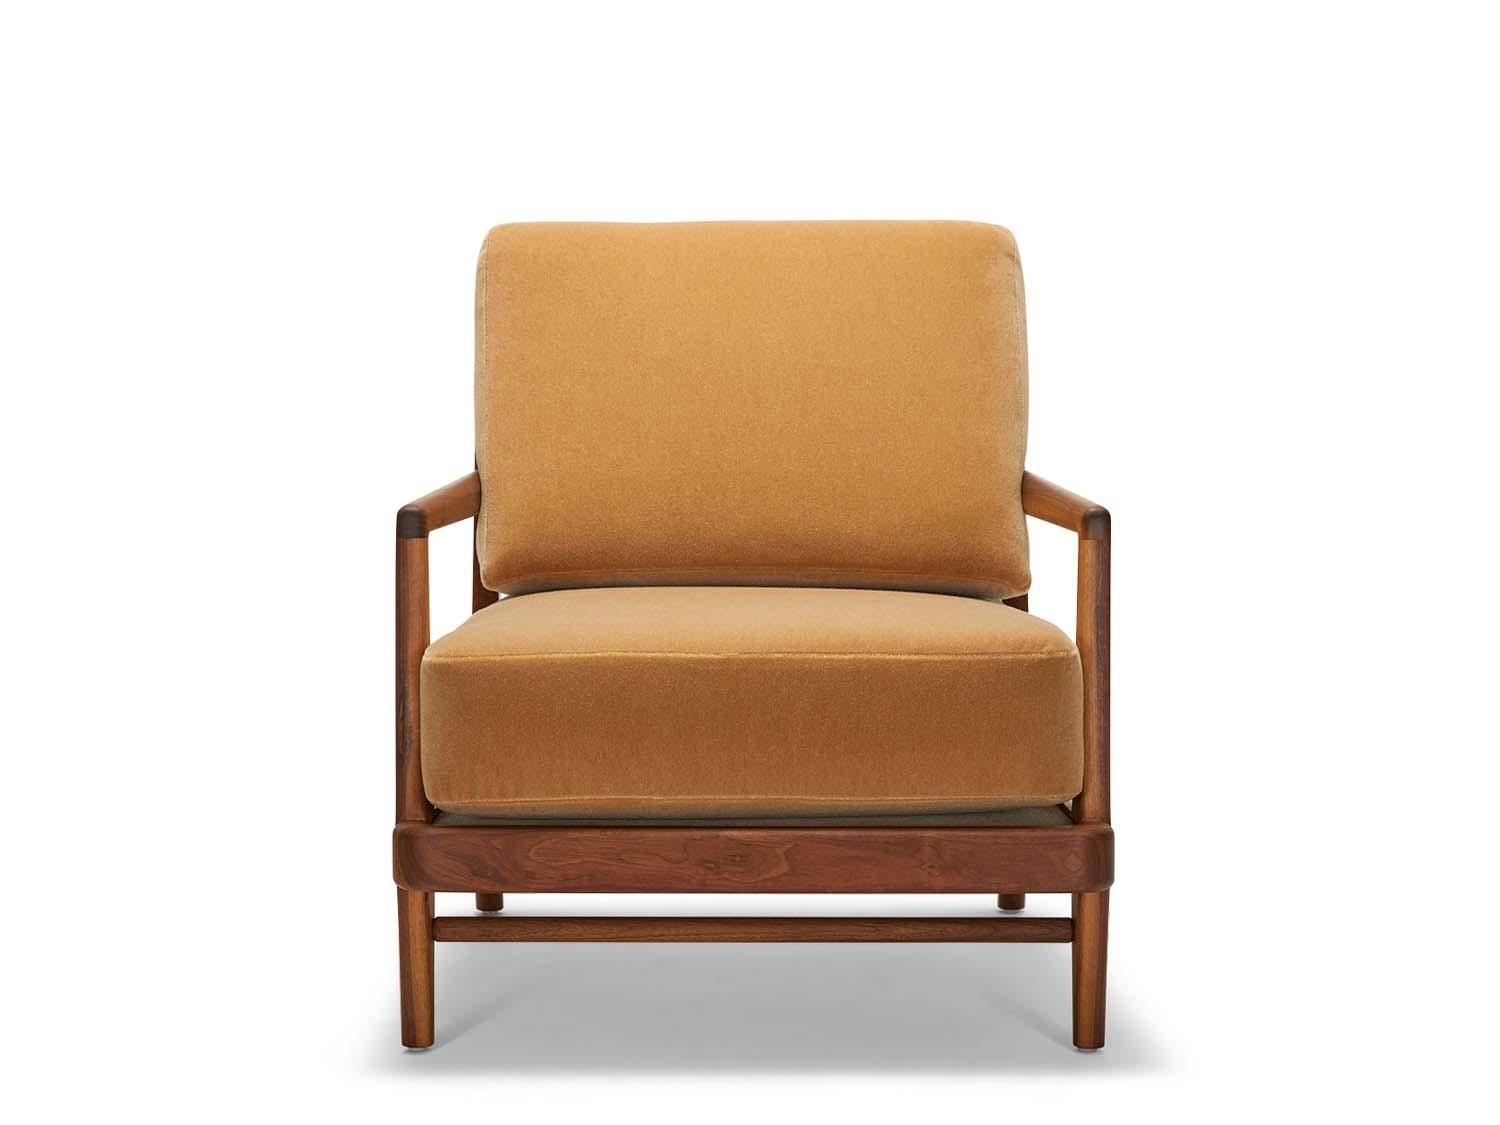 The headlands Lounge chair by Lawson-Fenning features a sculptural solid wood frame and upholstered cushions.

The Lawson-Fenning Collection is designed and handmade in Los Angeles, California. Reach out to discover what options are currently in